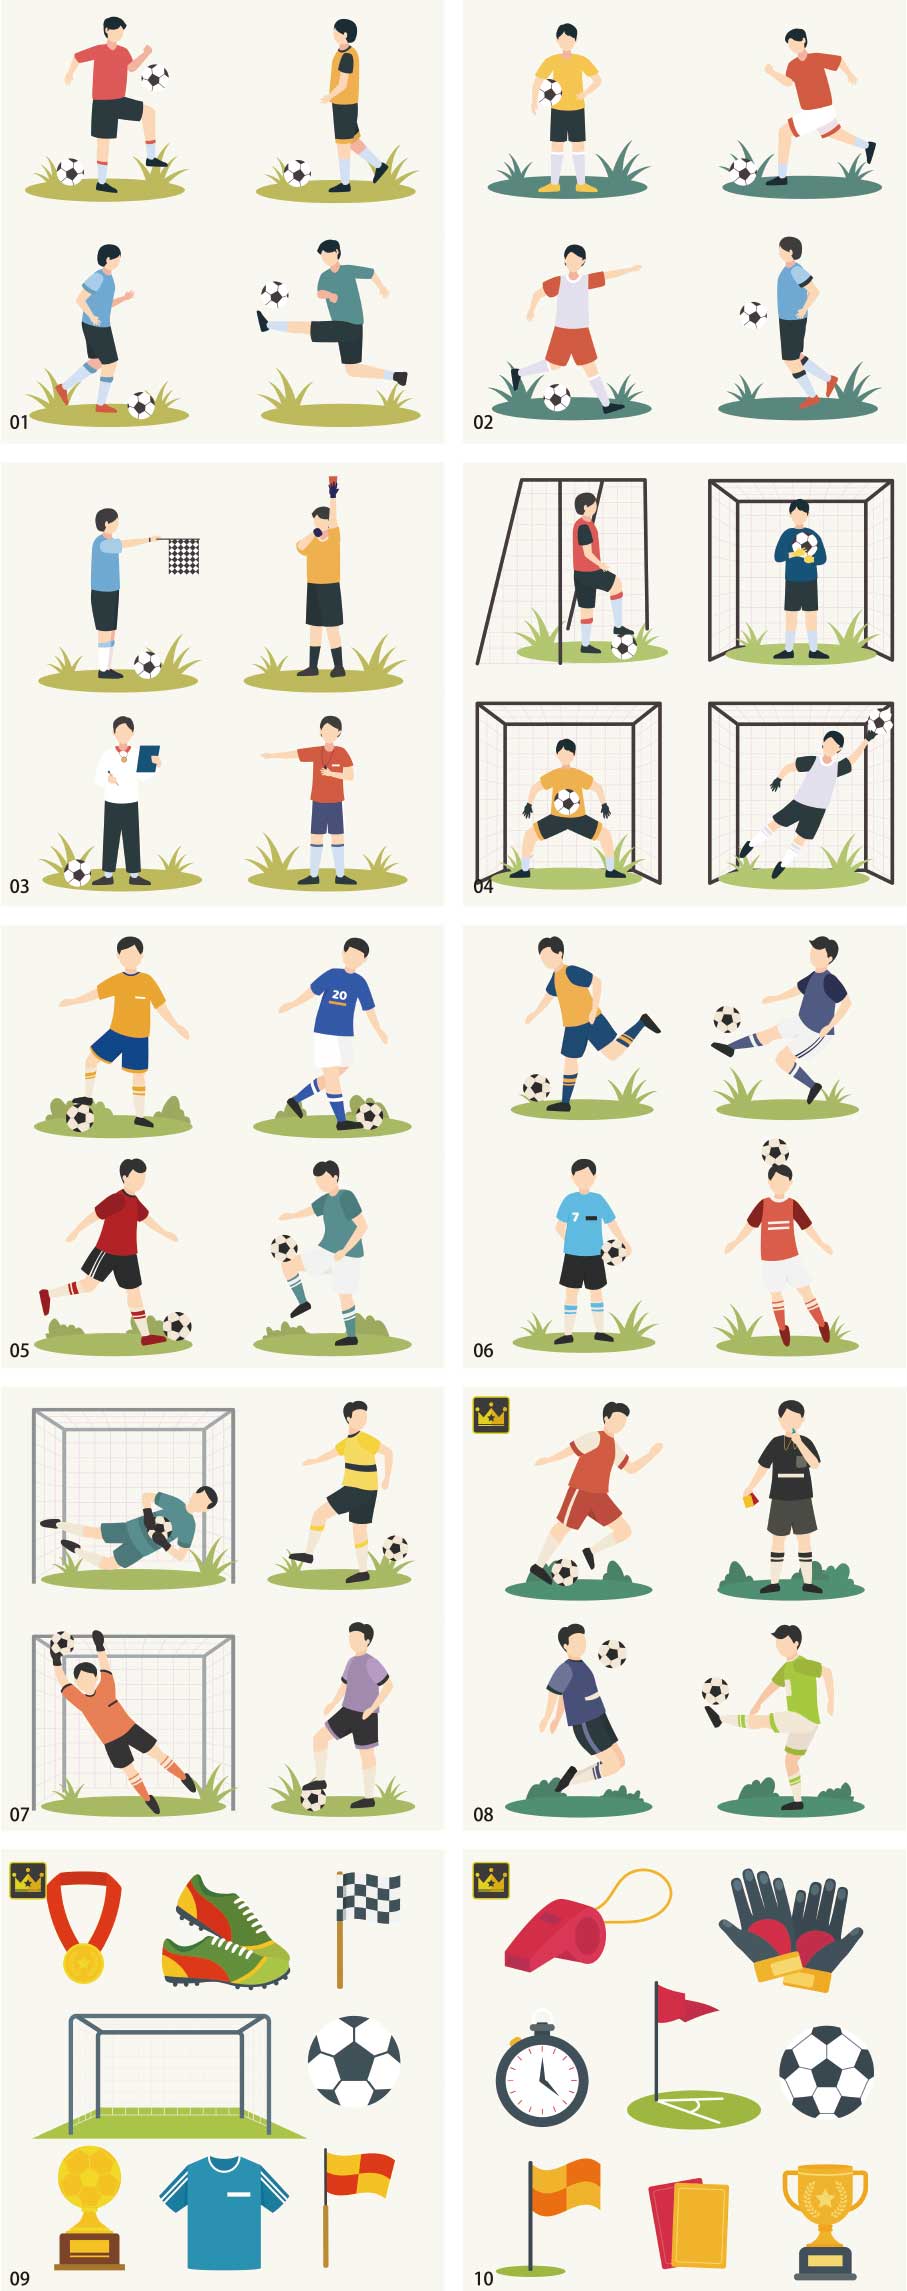 Soccer illustration collection